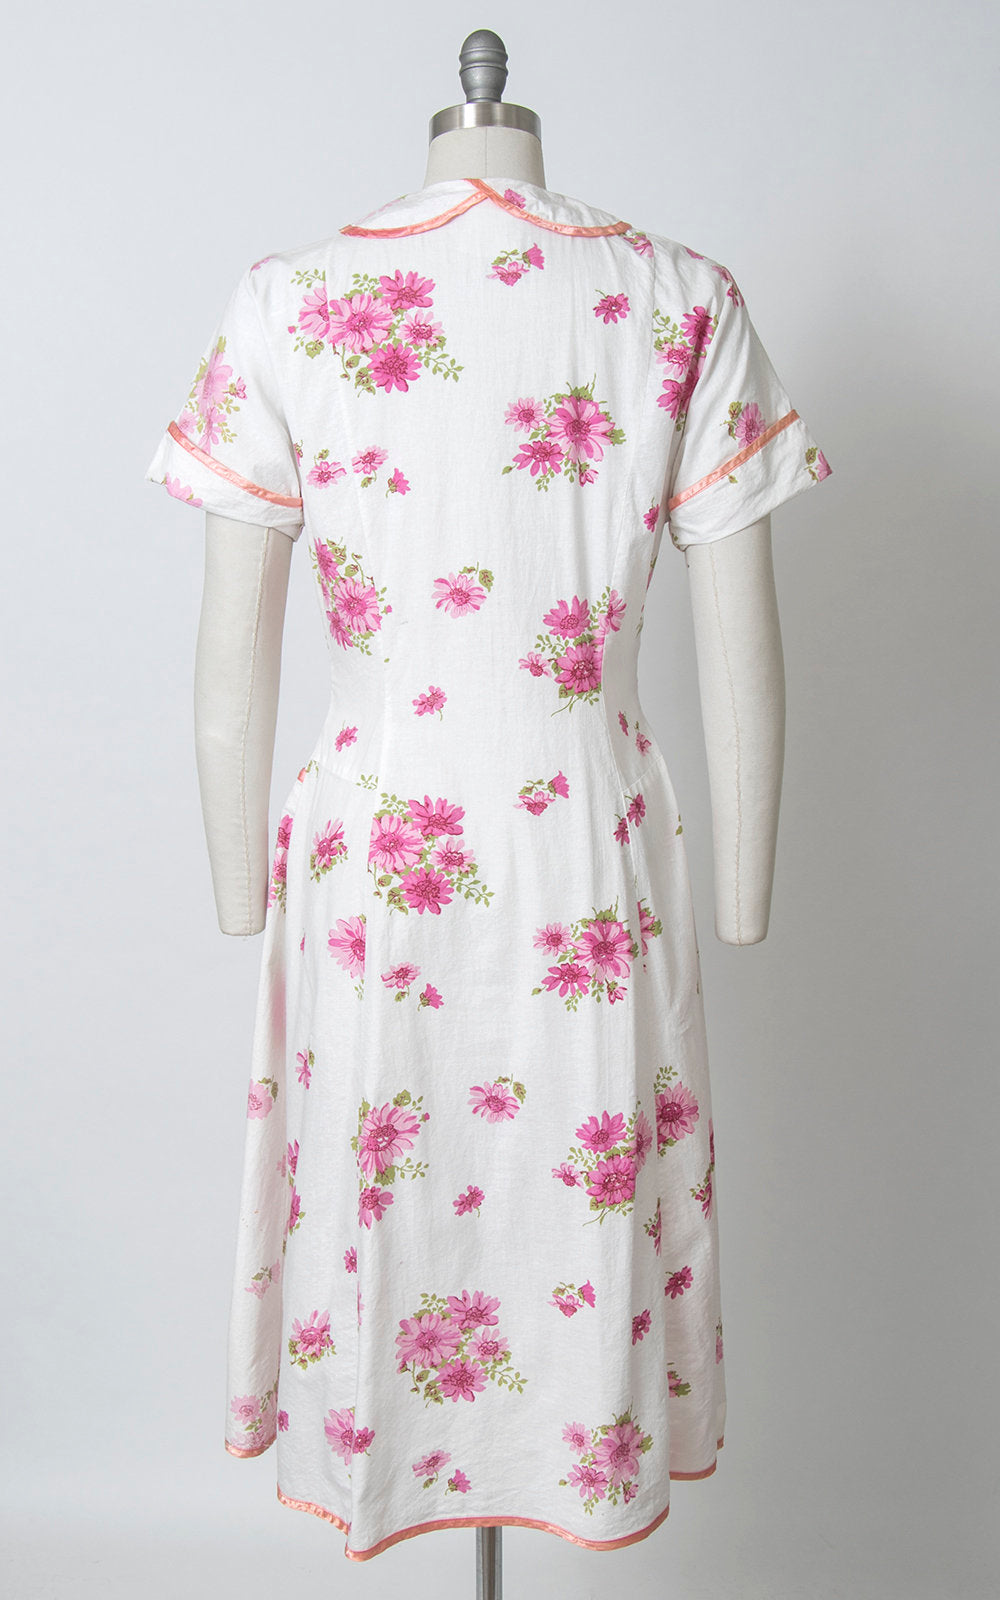 Vintage 1940s Dress | 40s Floral Print Cotton Day Dress White Pink House Dress with Pockets (medium)